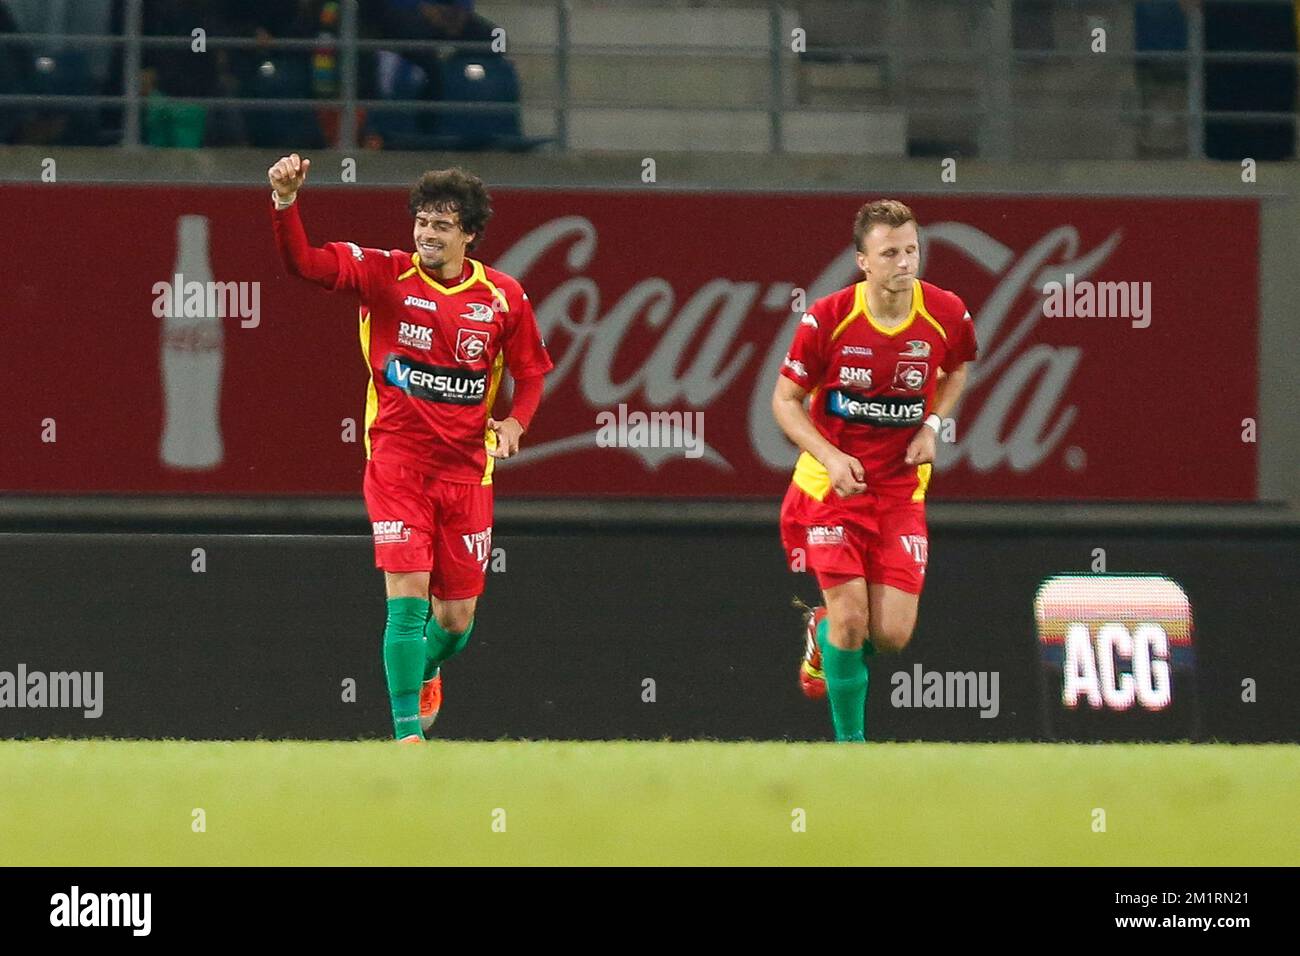 Oostende's Fernando Canesin celebrates after scoring during the Jupiler Pro League match between KAA Gent and KV Oostende, in Gent, Saturday 21 September 2013, on day 8 of the Belgian soccer championship. BELGA PHOTO BRUNO FAHY Stock Photo